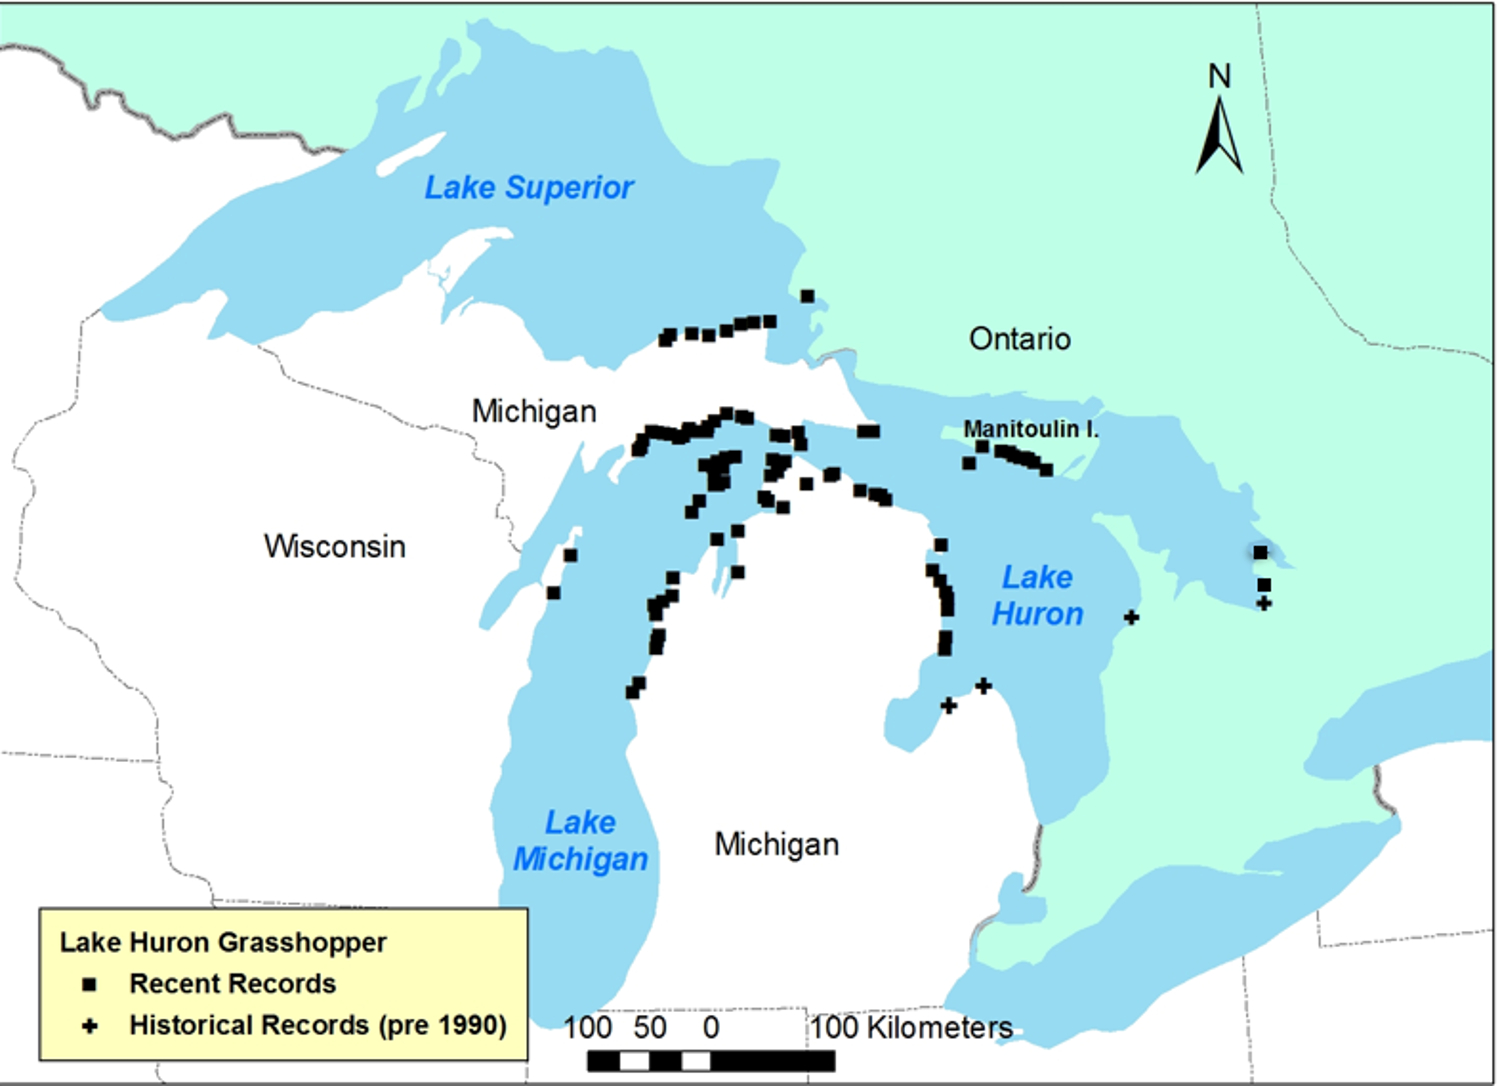 Global range of Lake Huron Grasshopper. Black squares indicate extant populations (observations within the last 20 years).